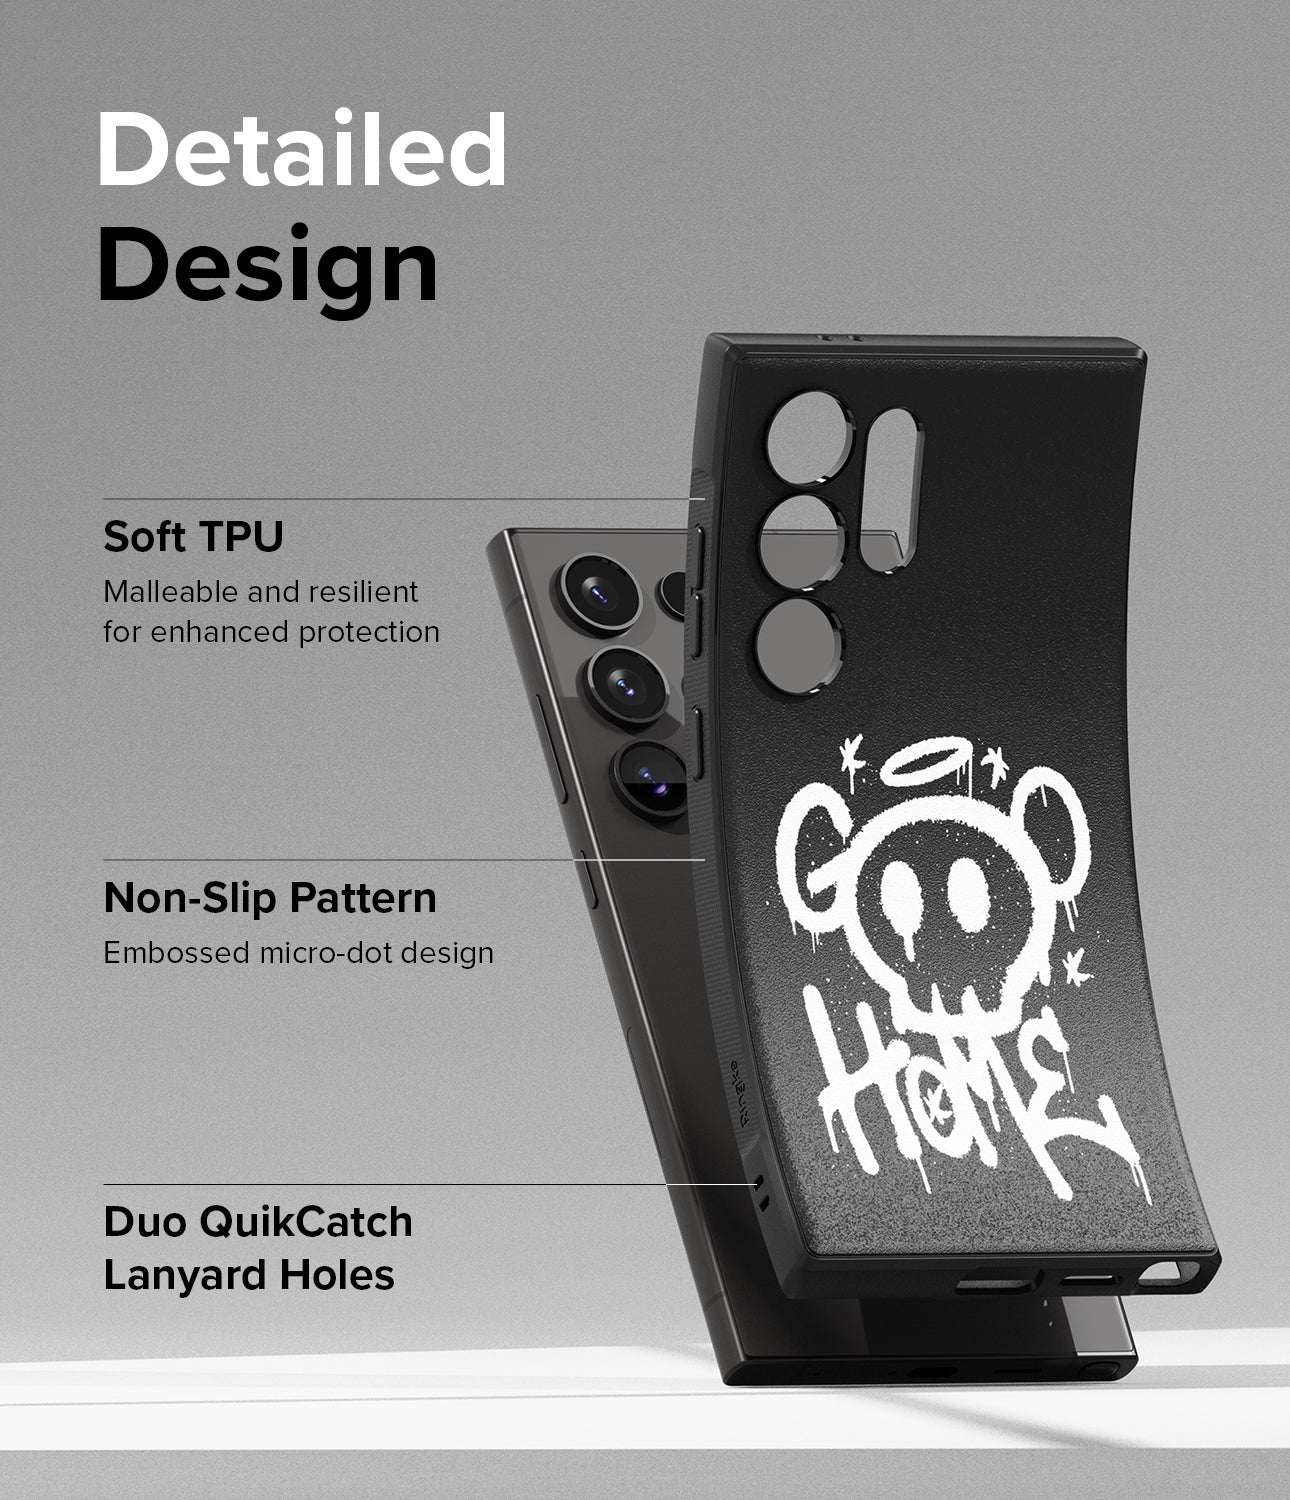 Galaxy S24 Ultra Case | Onyx Design - Graffiti 2 - Detailed Design. Malleable and resilient for enhanced protection with Soft TPU. Embossed micro-dot design with Non-Slip Pattern. Duo QuikCatch Lanyard Holes.